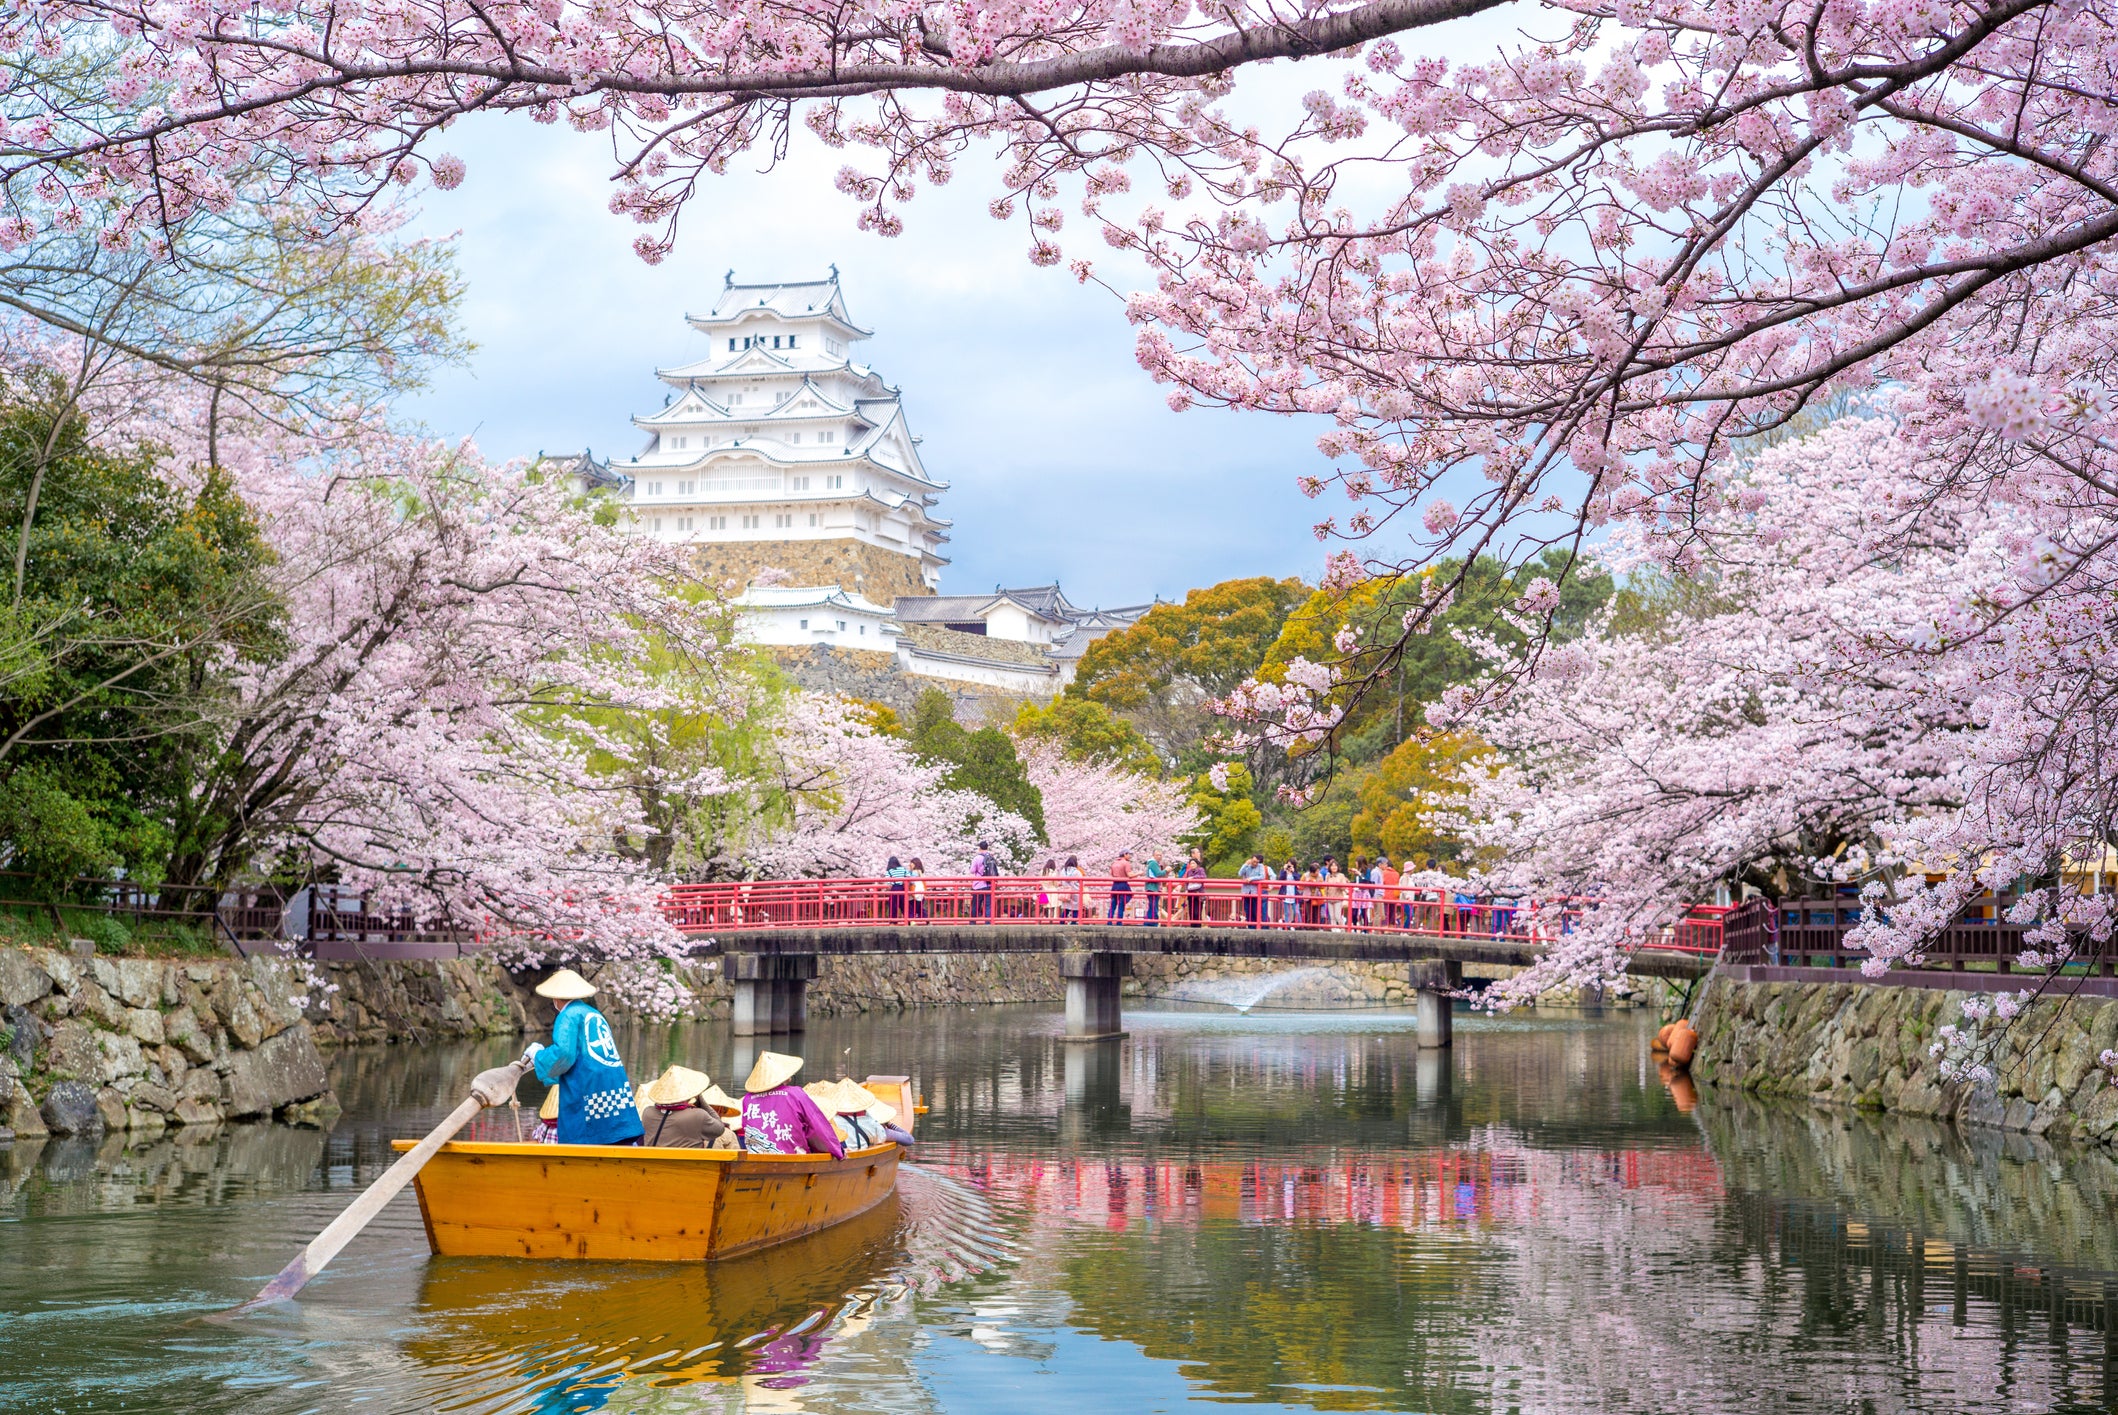 Take a 16 day tour of Japan’s historic highlights